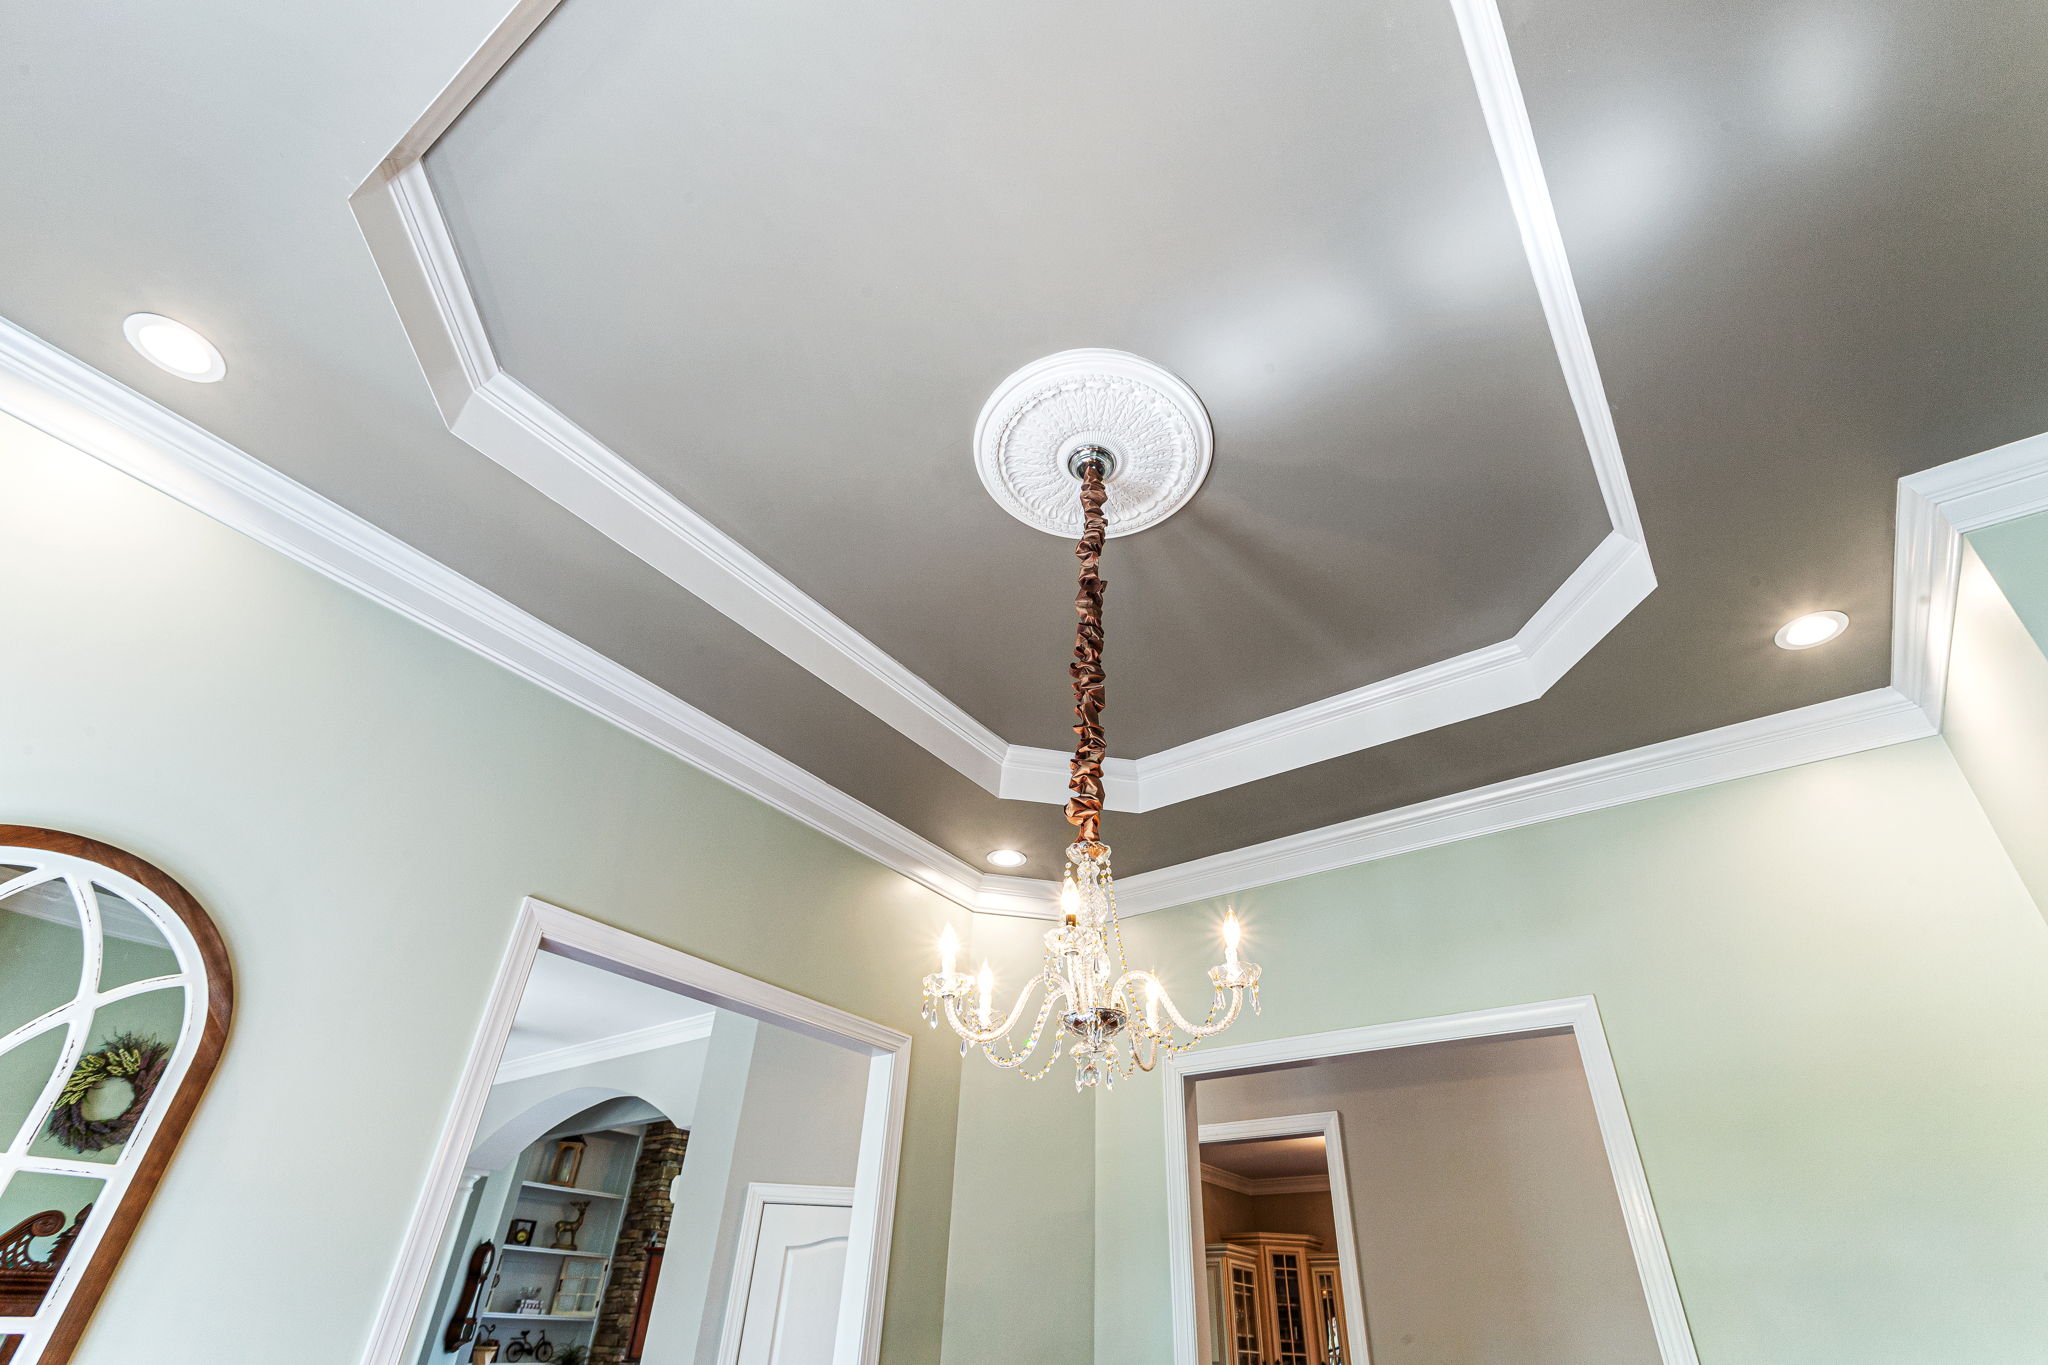 12-foot tray ceiling enhanced by step-out crown molding and subtle backlighting, crowned with a Swarovski Crystal Chandelier.